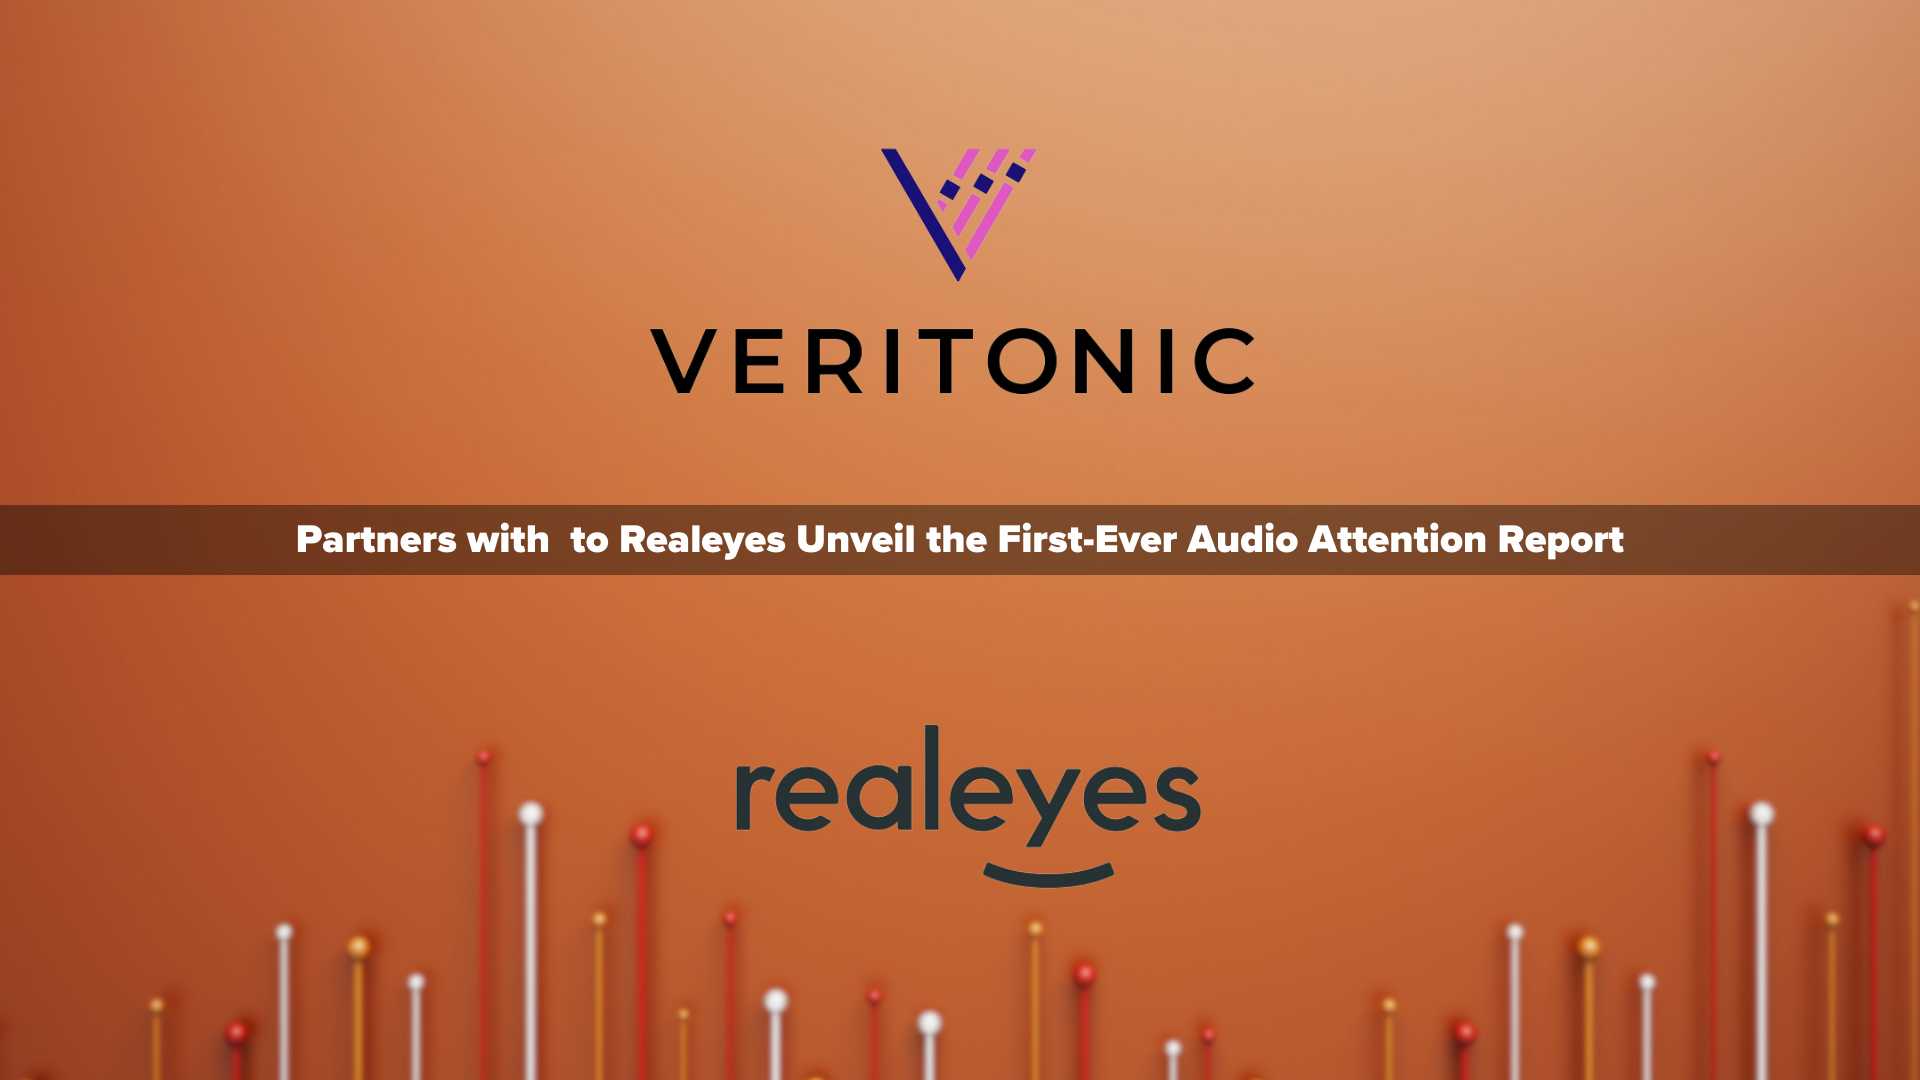 Veritonic Partners with Realeyes to Unveil the First-Ever Audio Attention Report